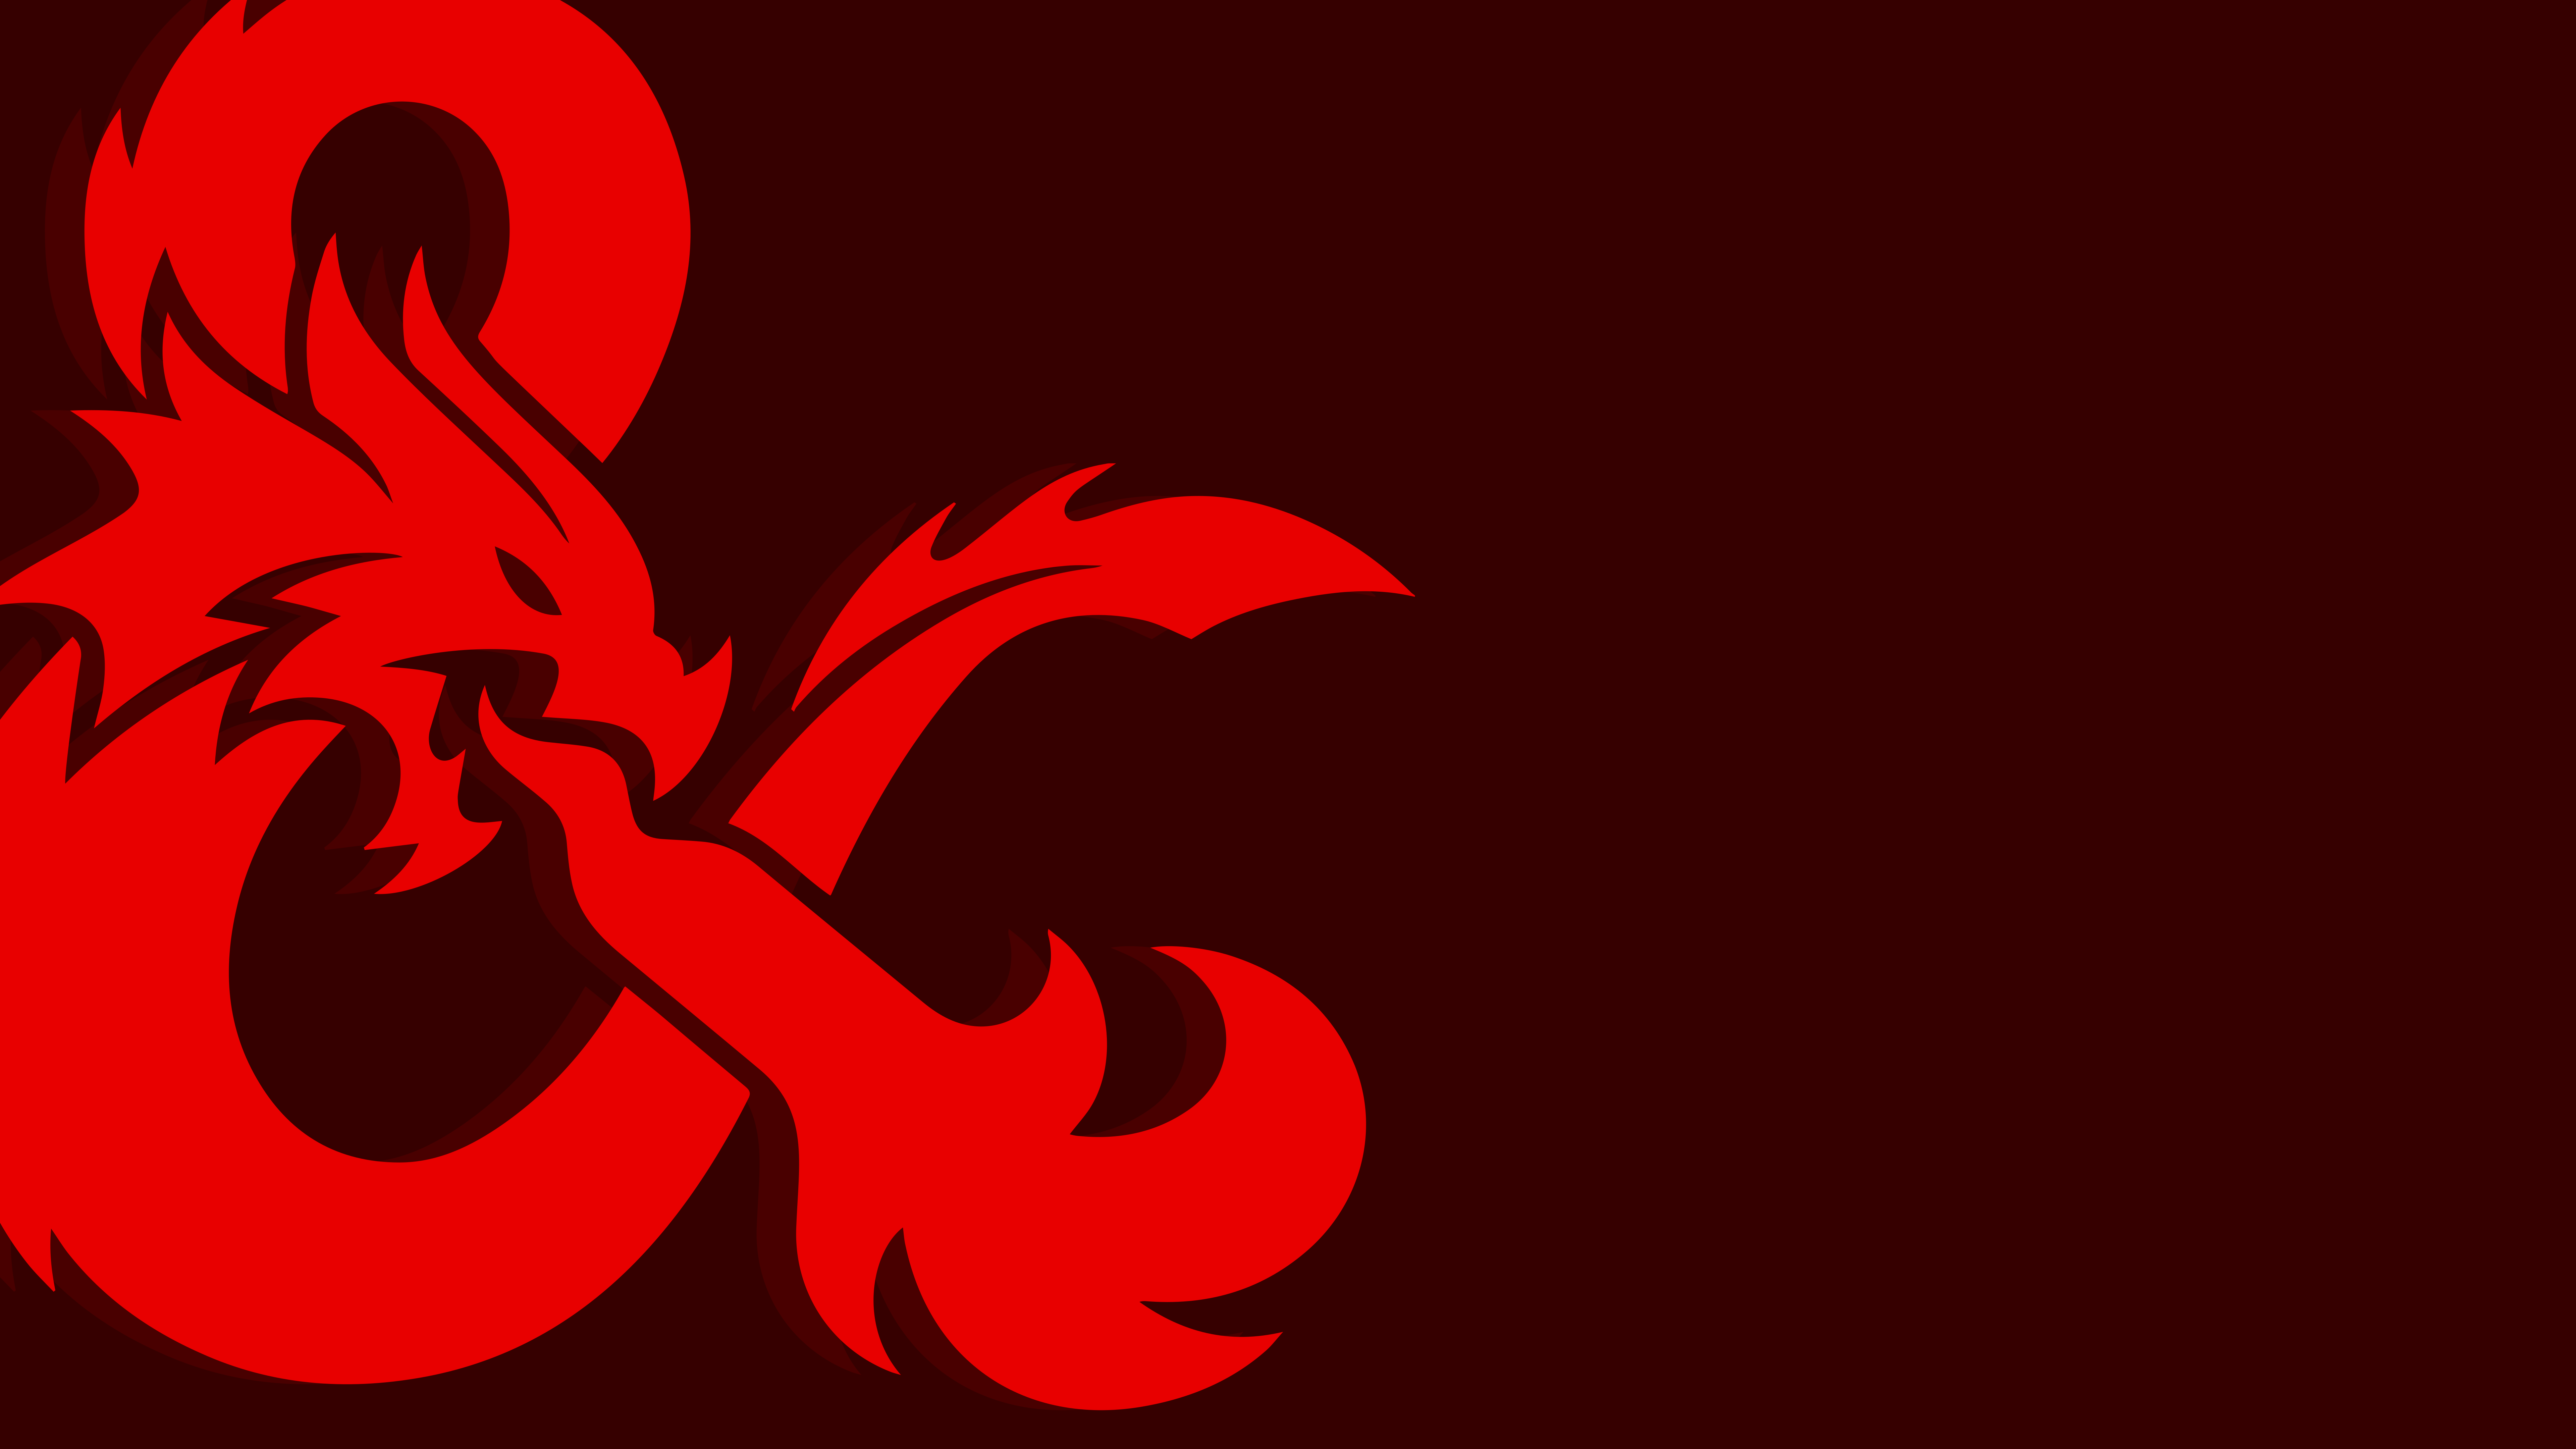 General 7680x4320 Dungeons & Dragons dragon red Ampersand minimalism simple background Wizards of the Coast digital art